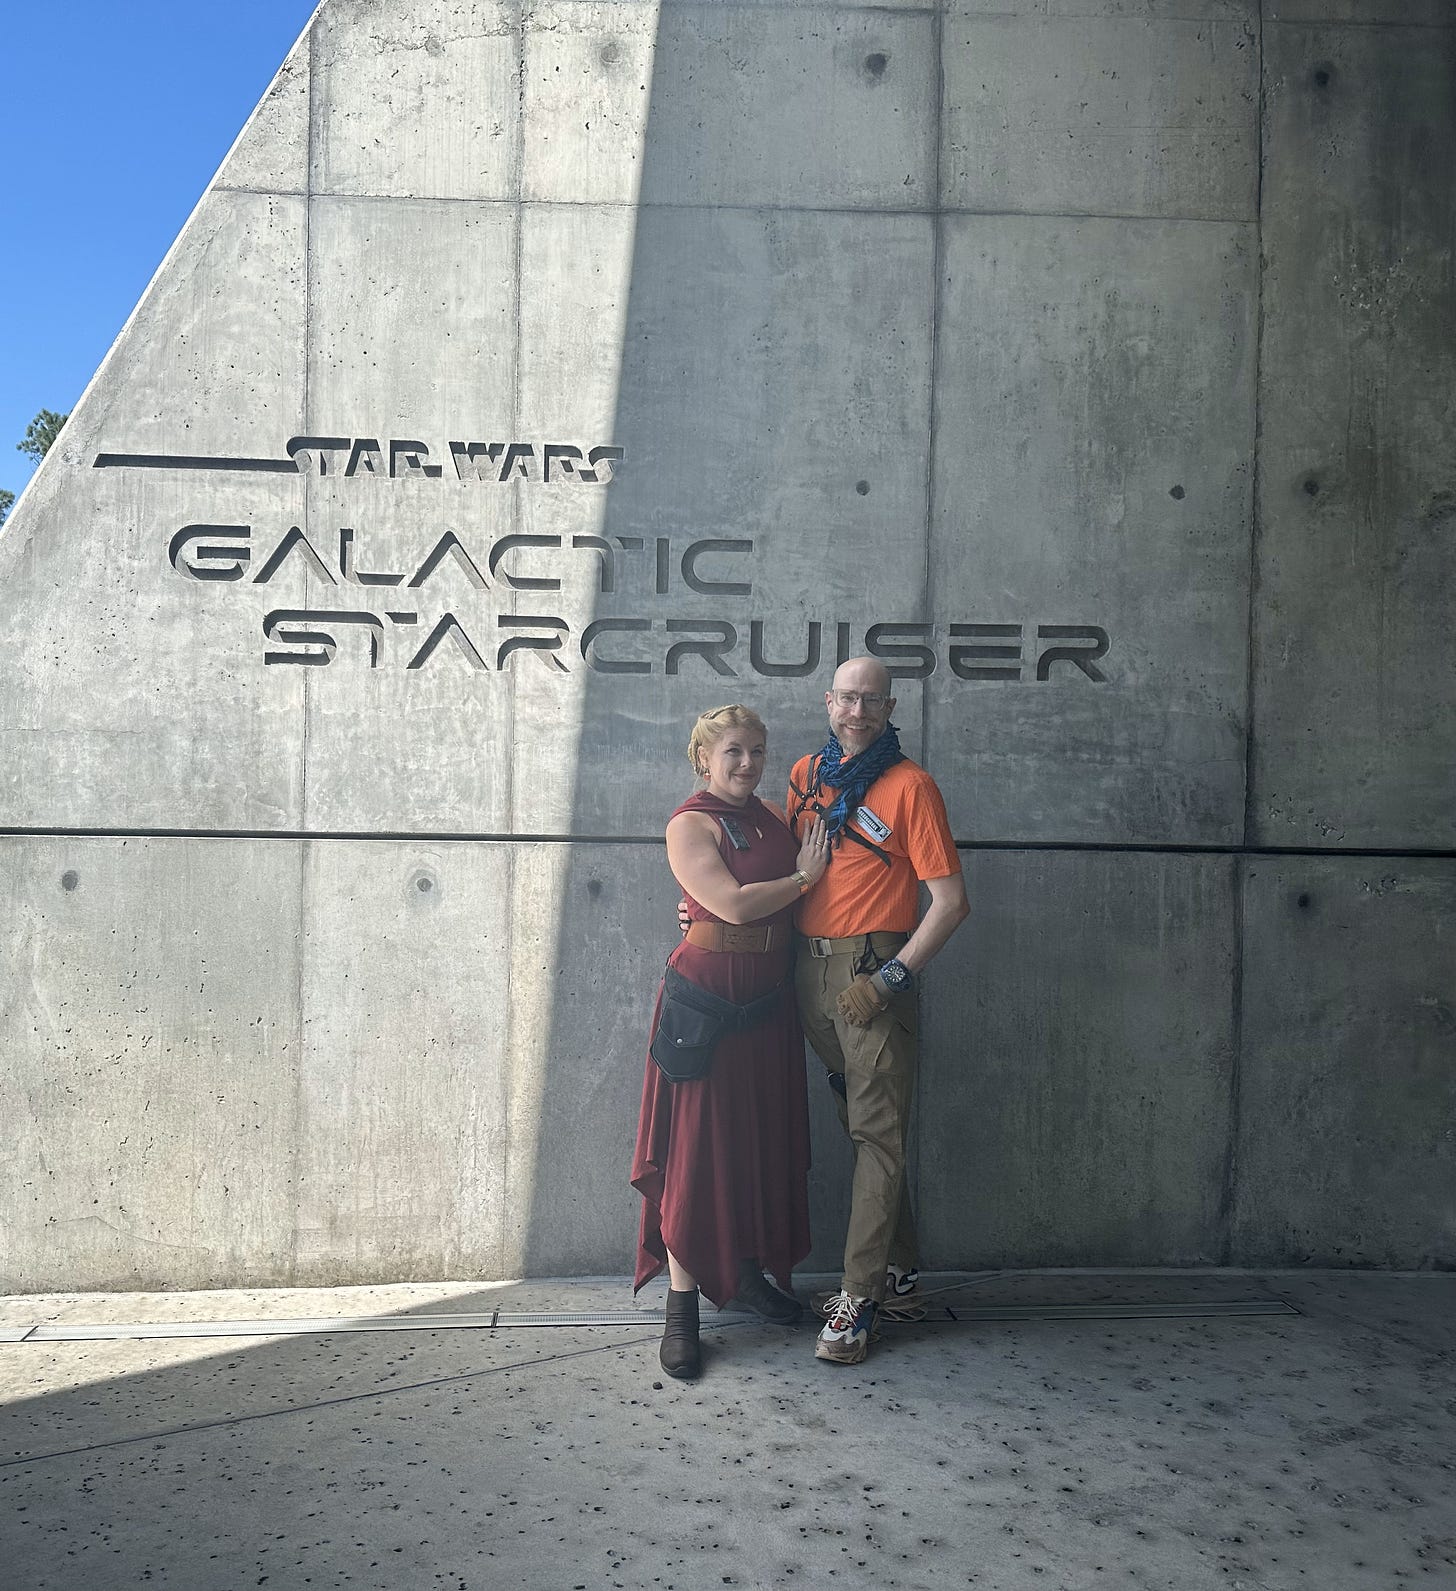 Cass and Noah, in their costumes, standing in front of the Star Wars Galactic Starcruiser concrete signage